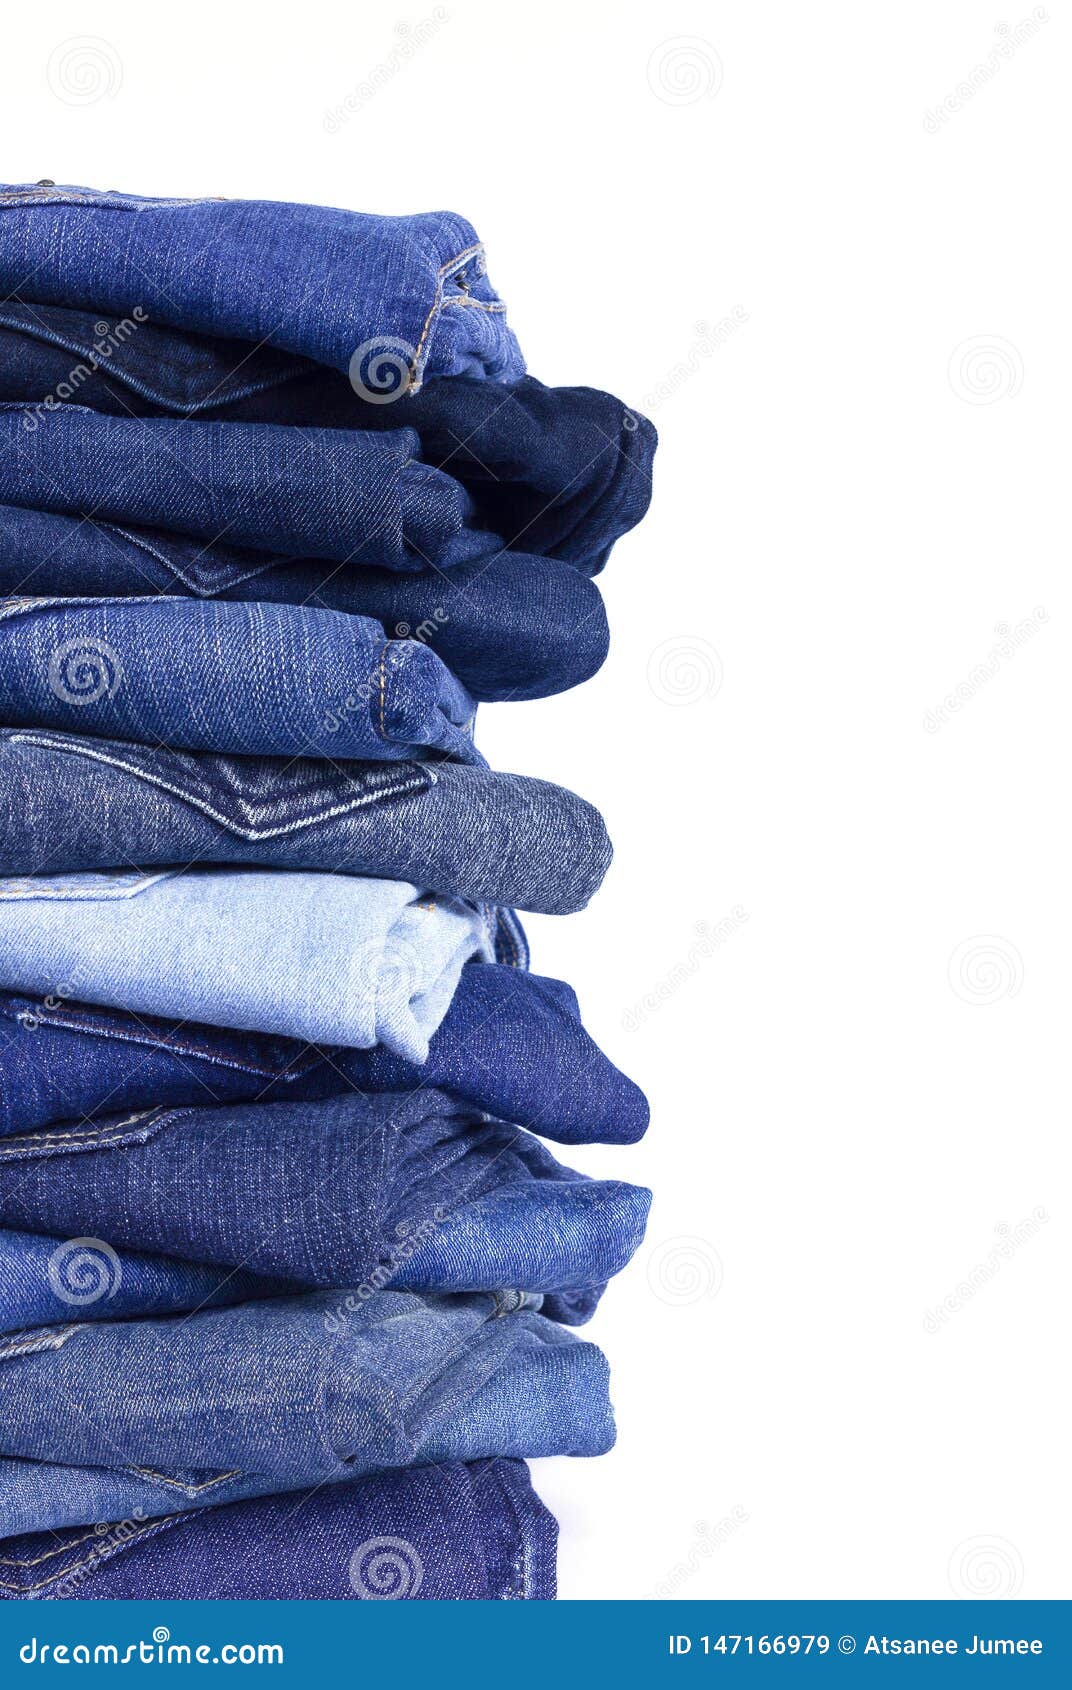 Jeans Stacked on White Background Blank for Design and Text Input ...